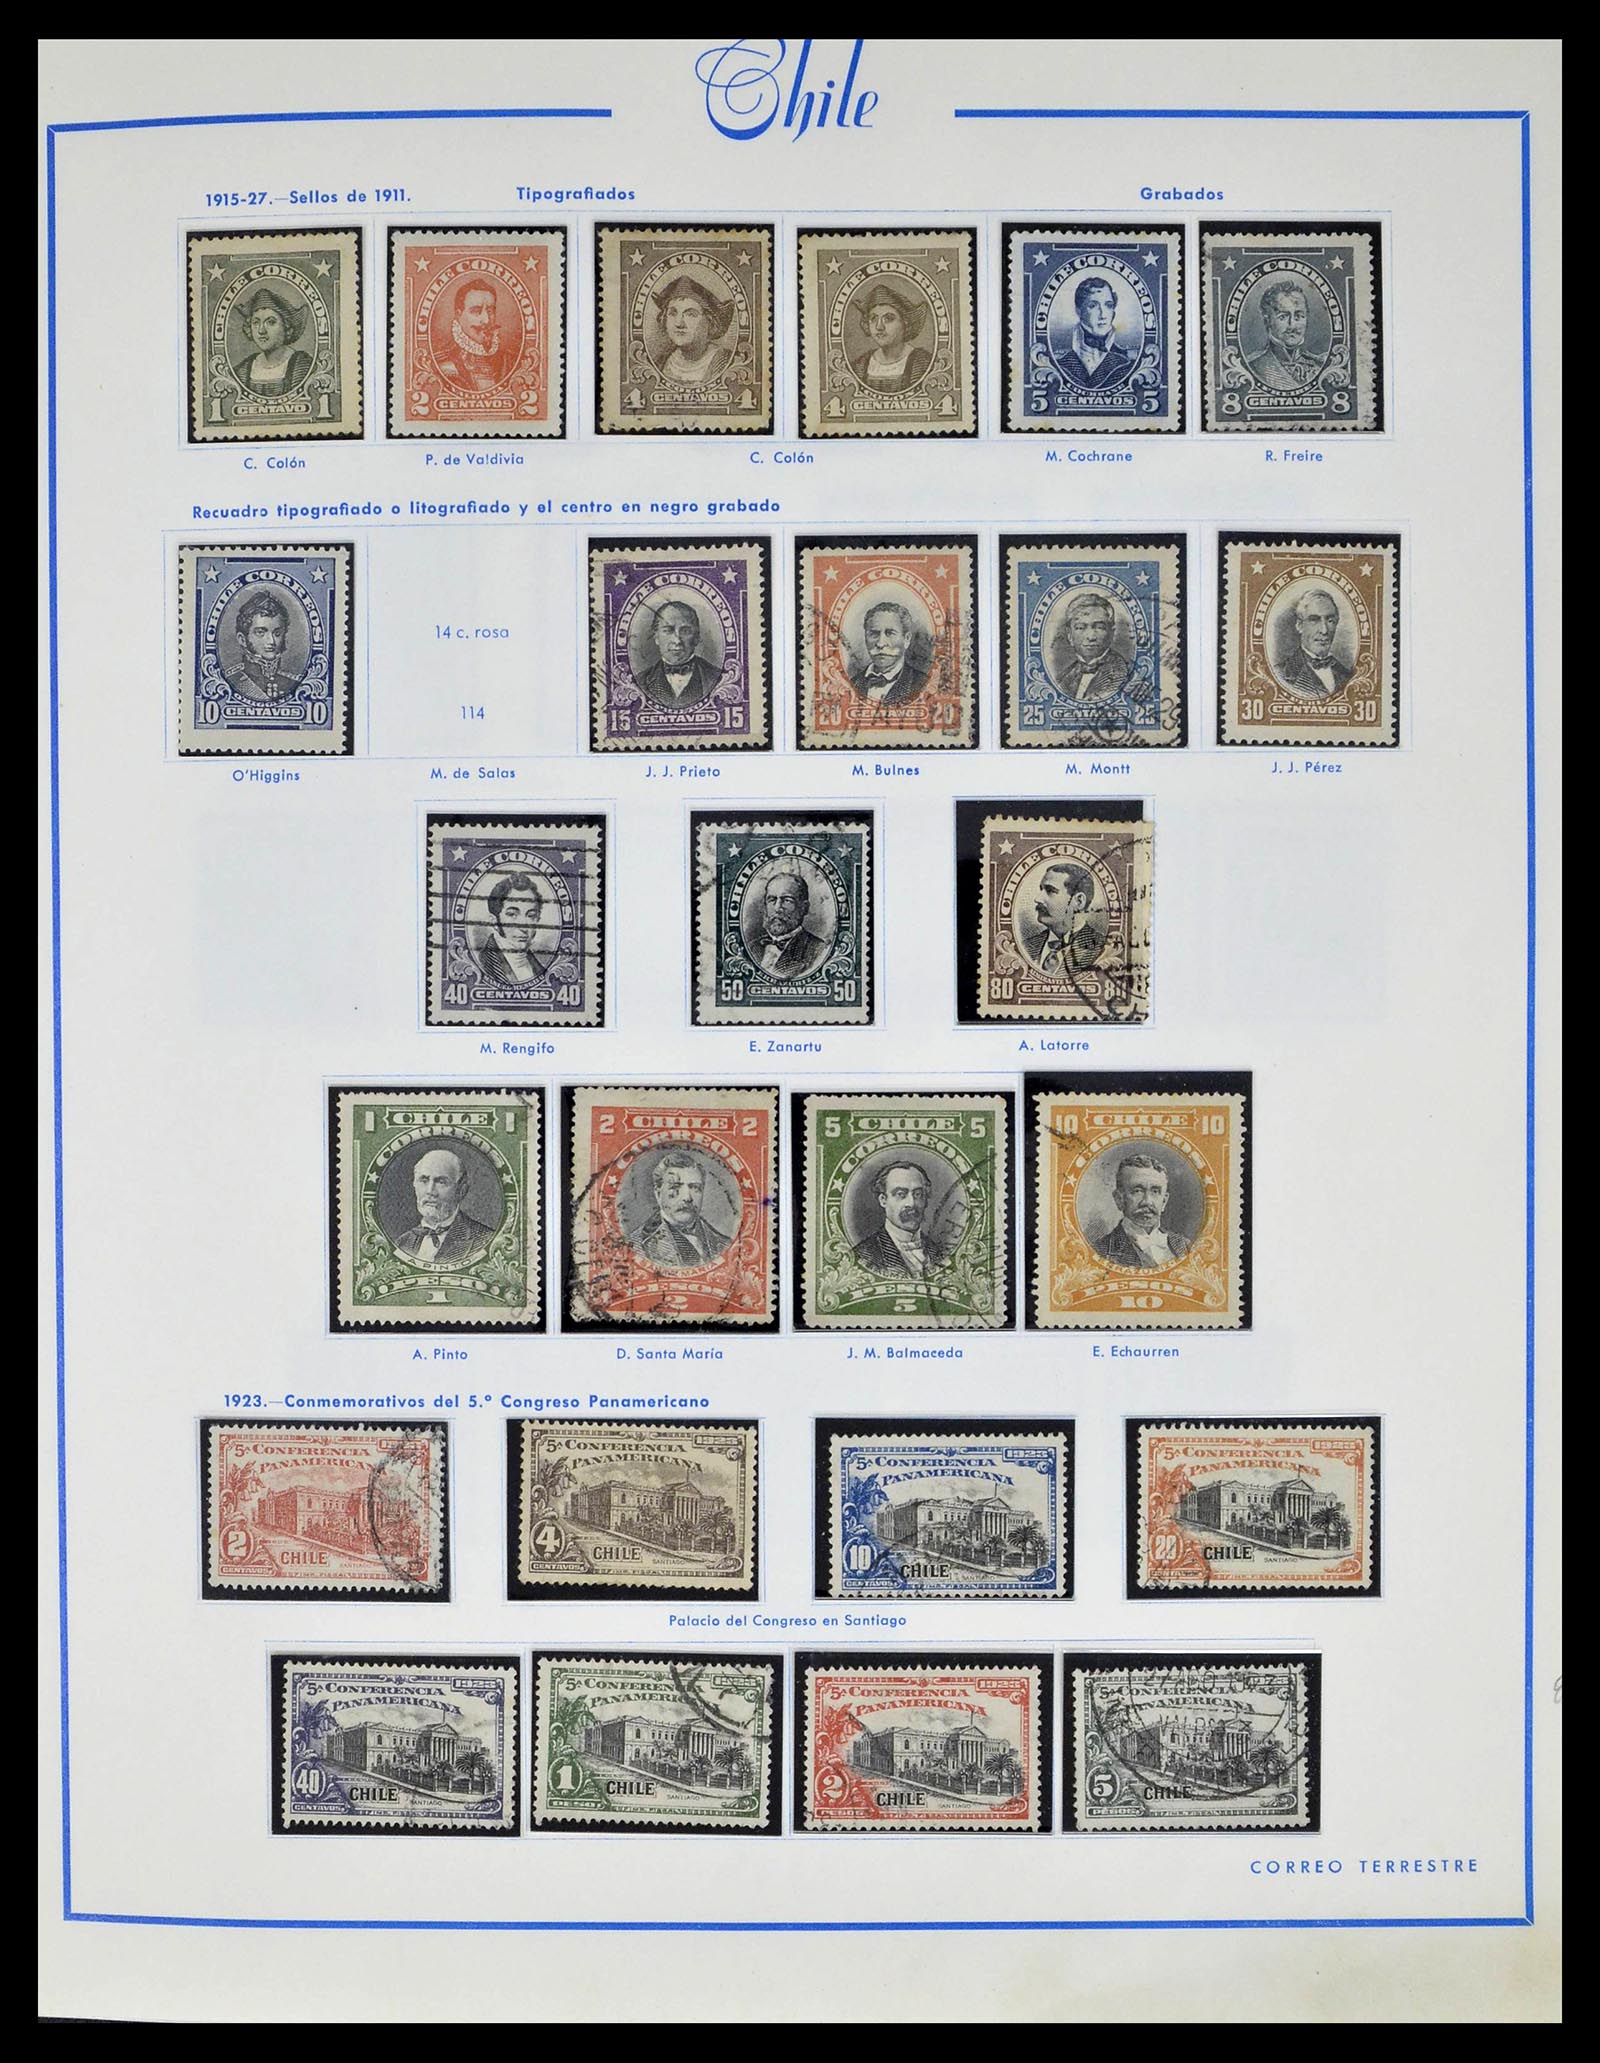 39213 0008 - Stamp collection 39213 Chile 1853-1970.